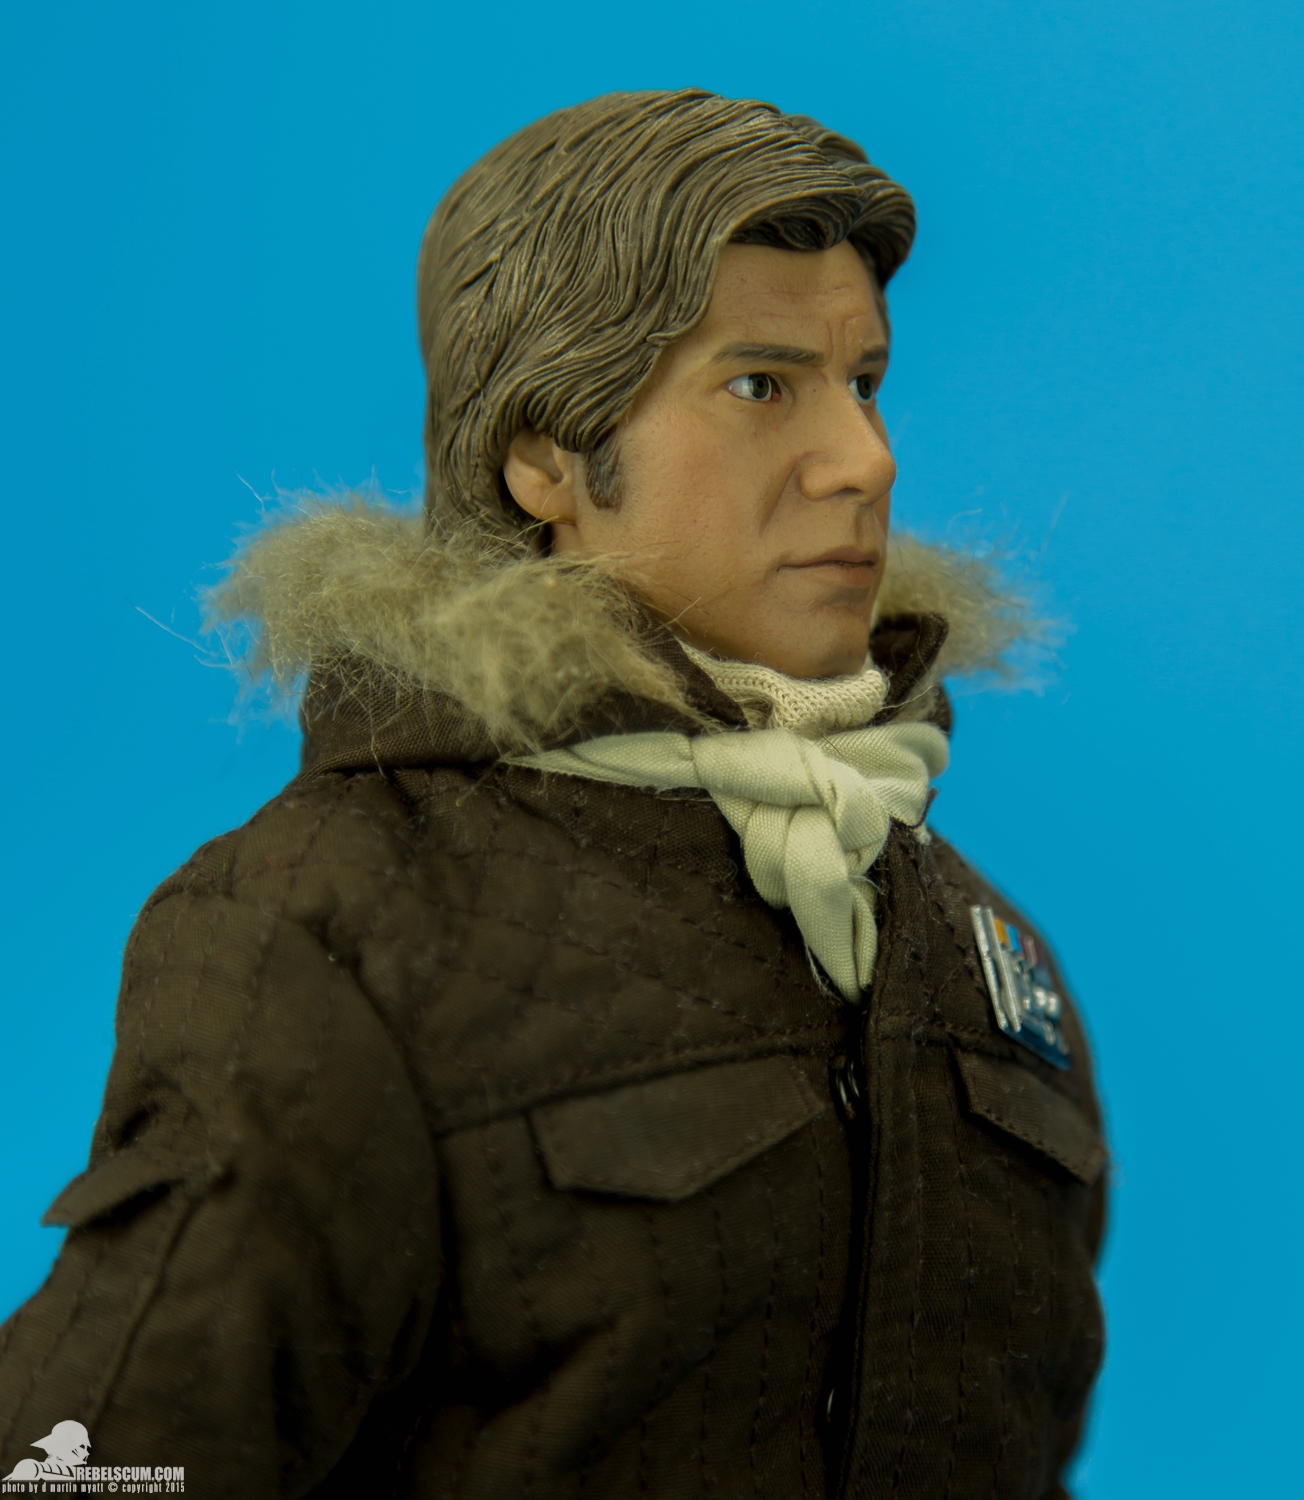 Han-Solo-Hoth-Brown-Sixth-Scale-Sideshow-Collectibles-Star-Wars-010.jpg